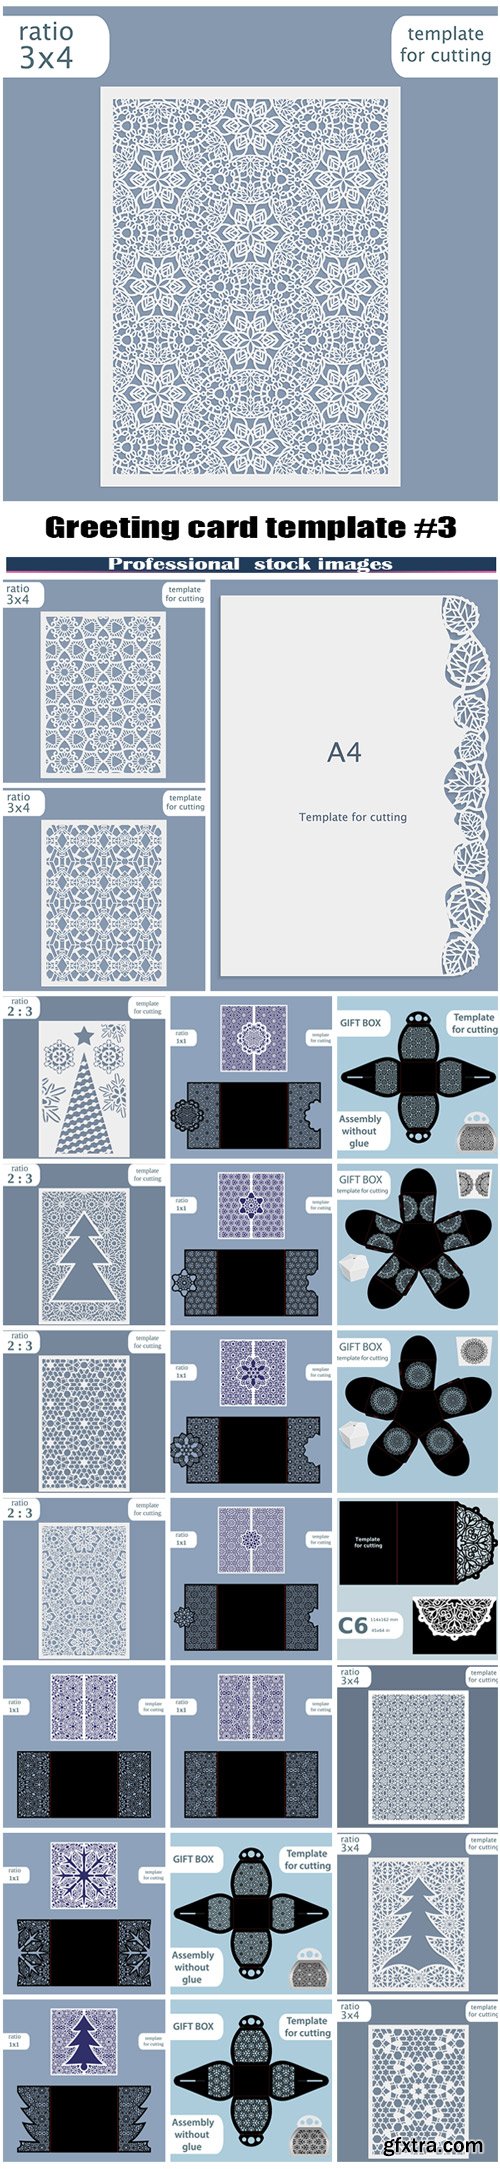 Greeting card template for cutting plotter #3